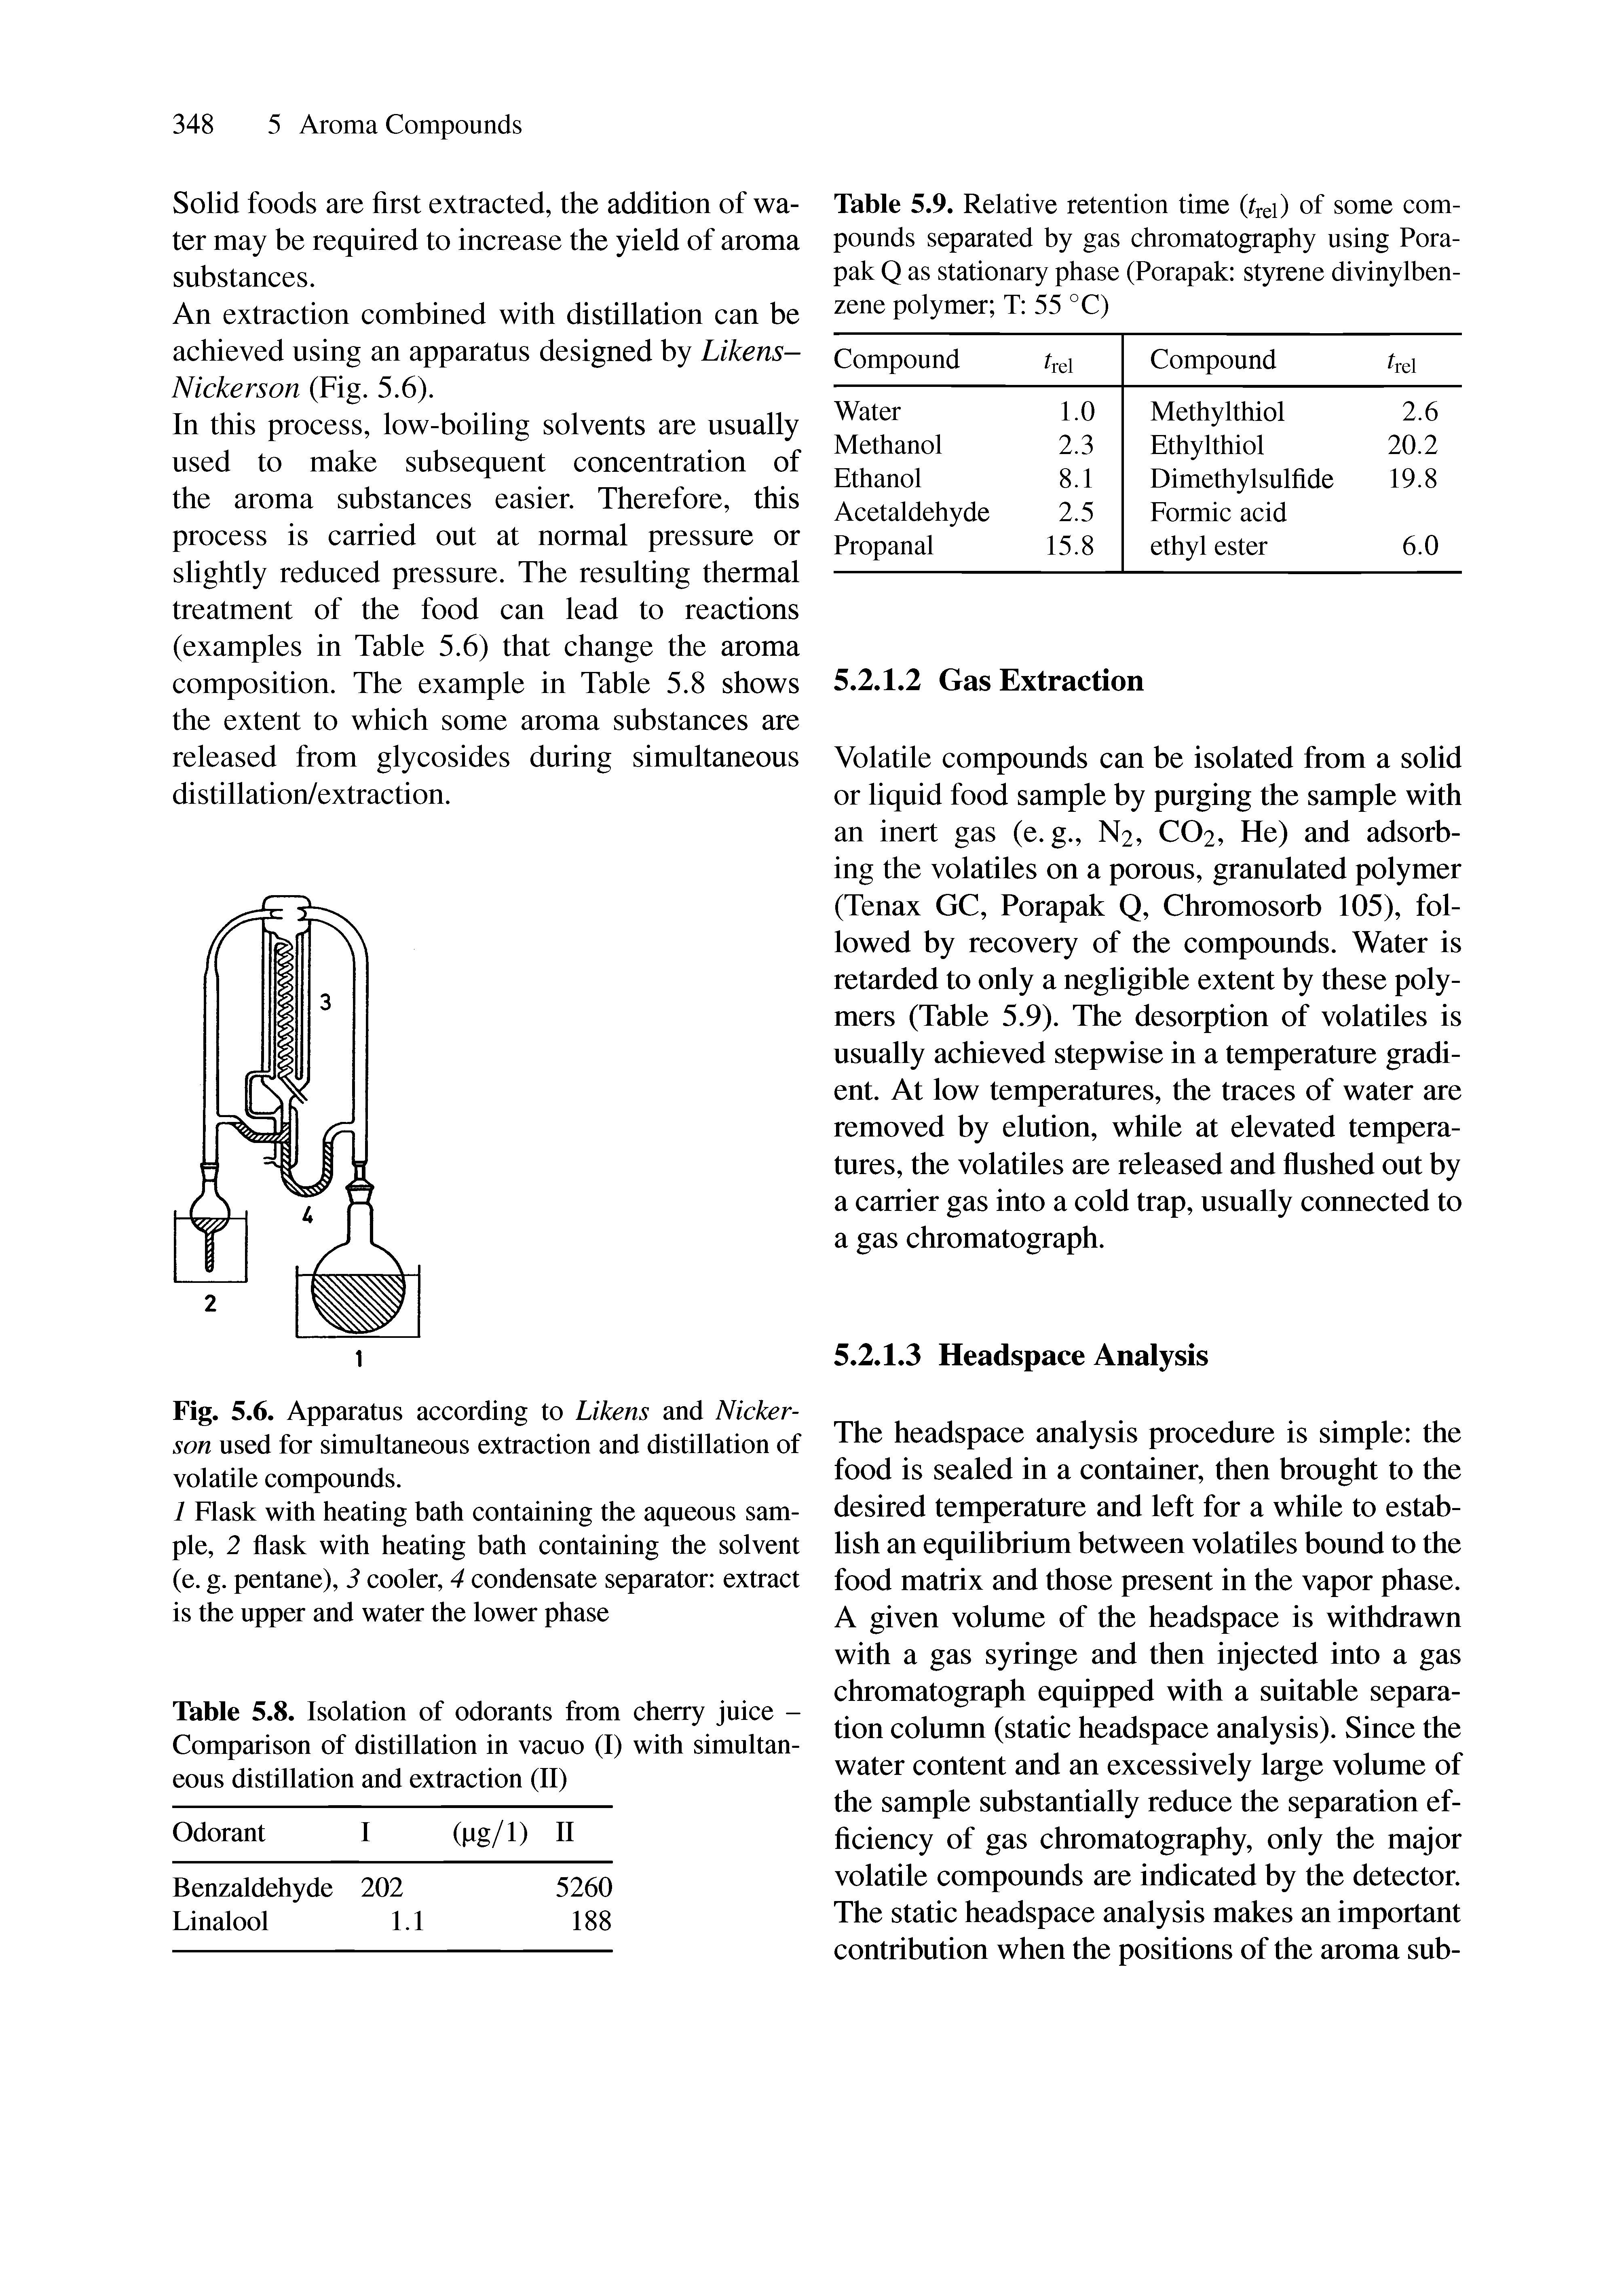 Fig. 5.6. Apparatus according to Likens and Nickerson used for simultaneous extraction and distillation of volatile compounds.